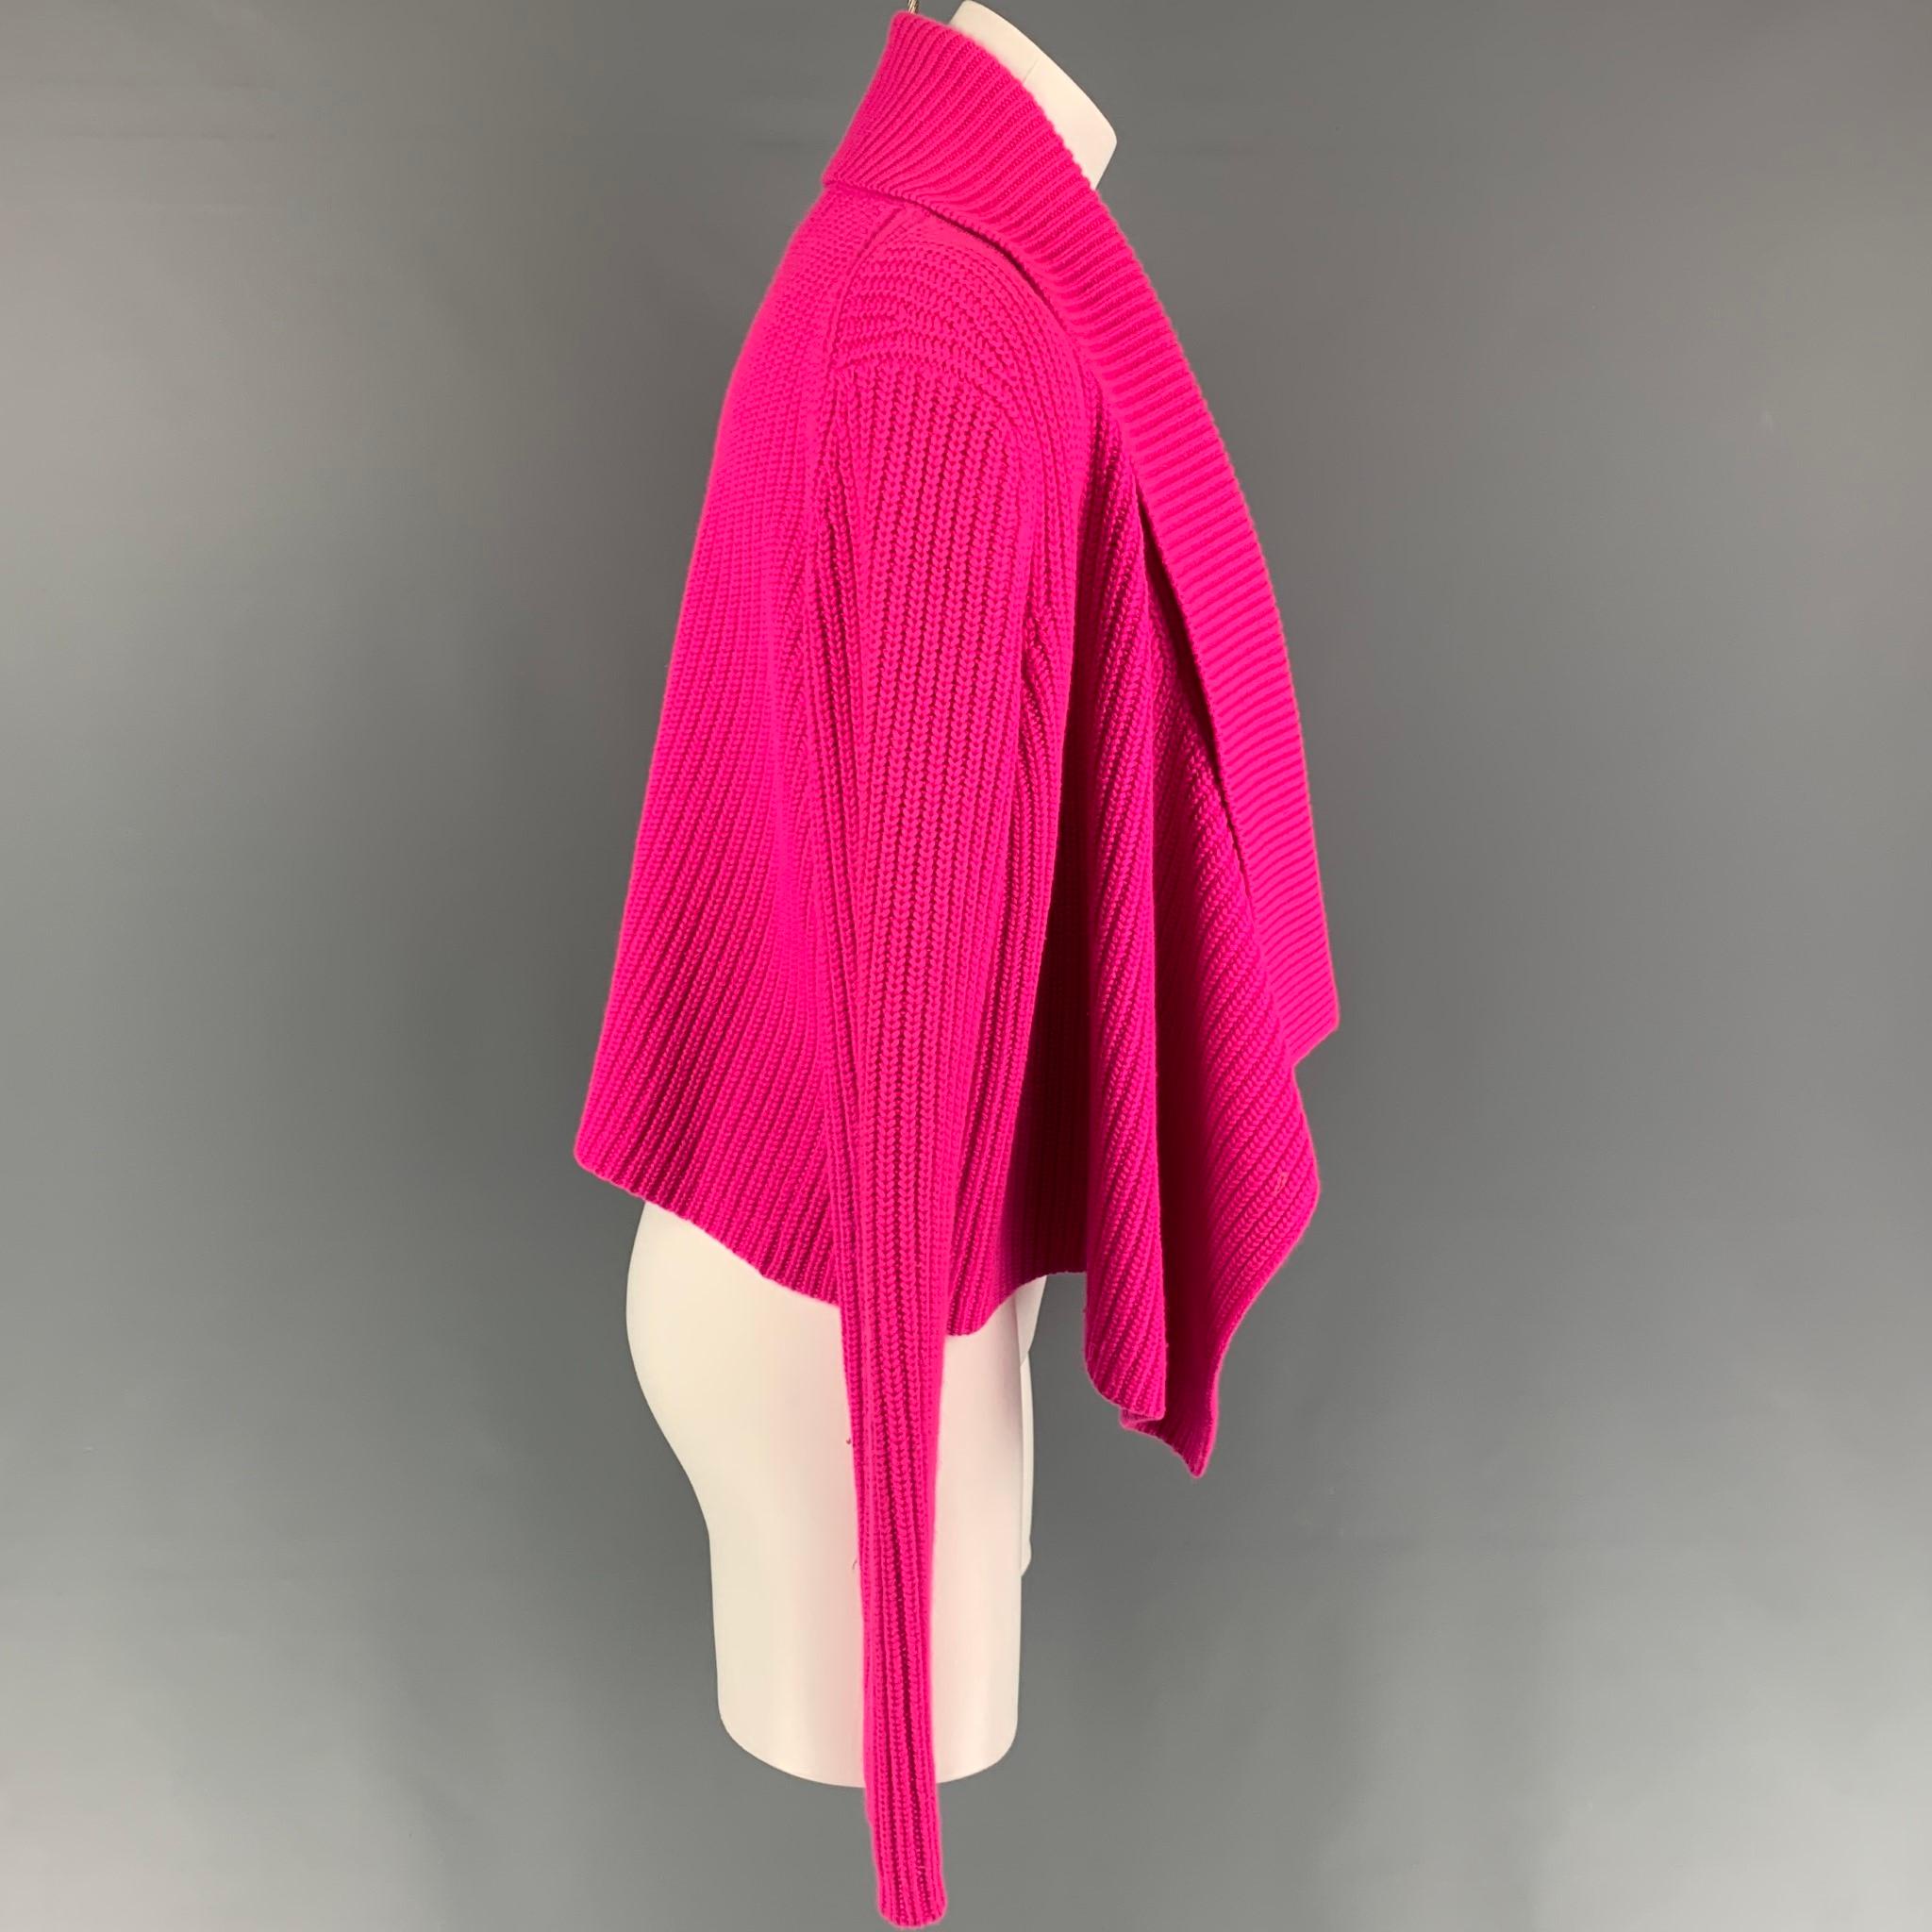 MICHAEL KORS cardigan comes in a pink knitted cashmere featuring a shawl collar and a open front. 

Very Good Pre-Owned Condition.
Marked: S

Measurements:

Shoulder: 17 in.
Bust: 38 in.
Sleeve: 28 in.
Length: 18 in. 